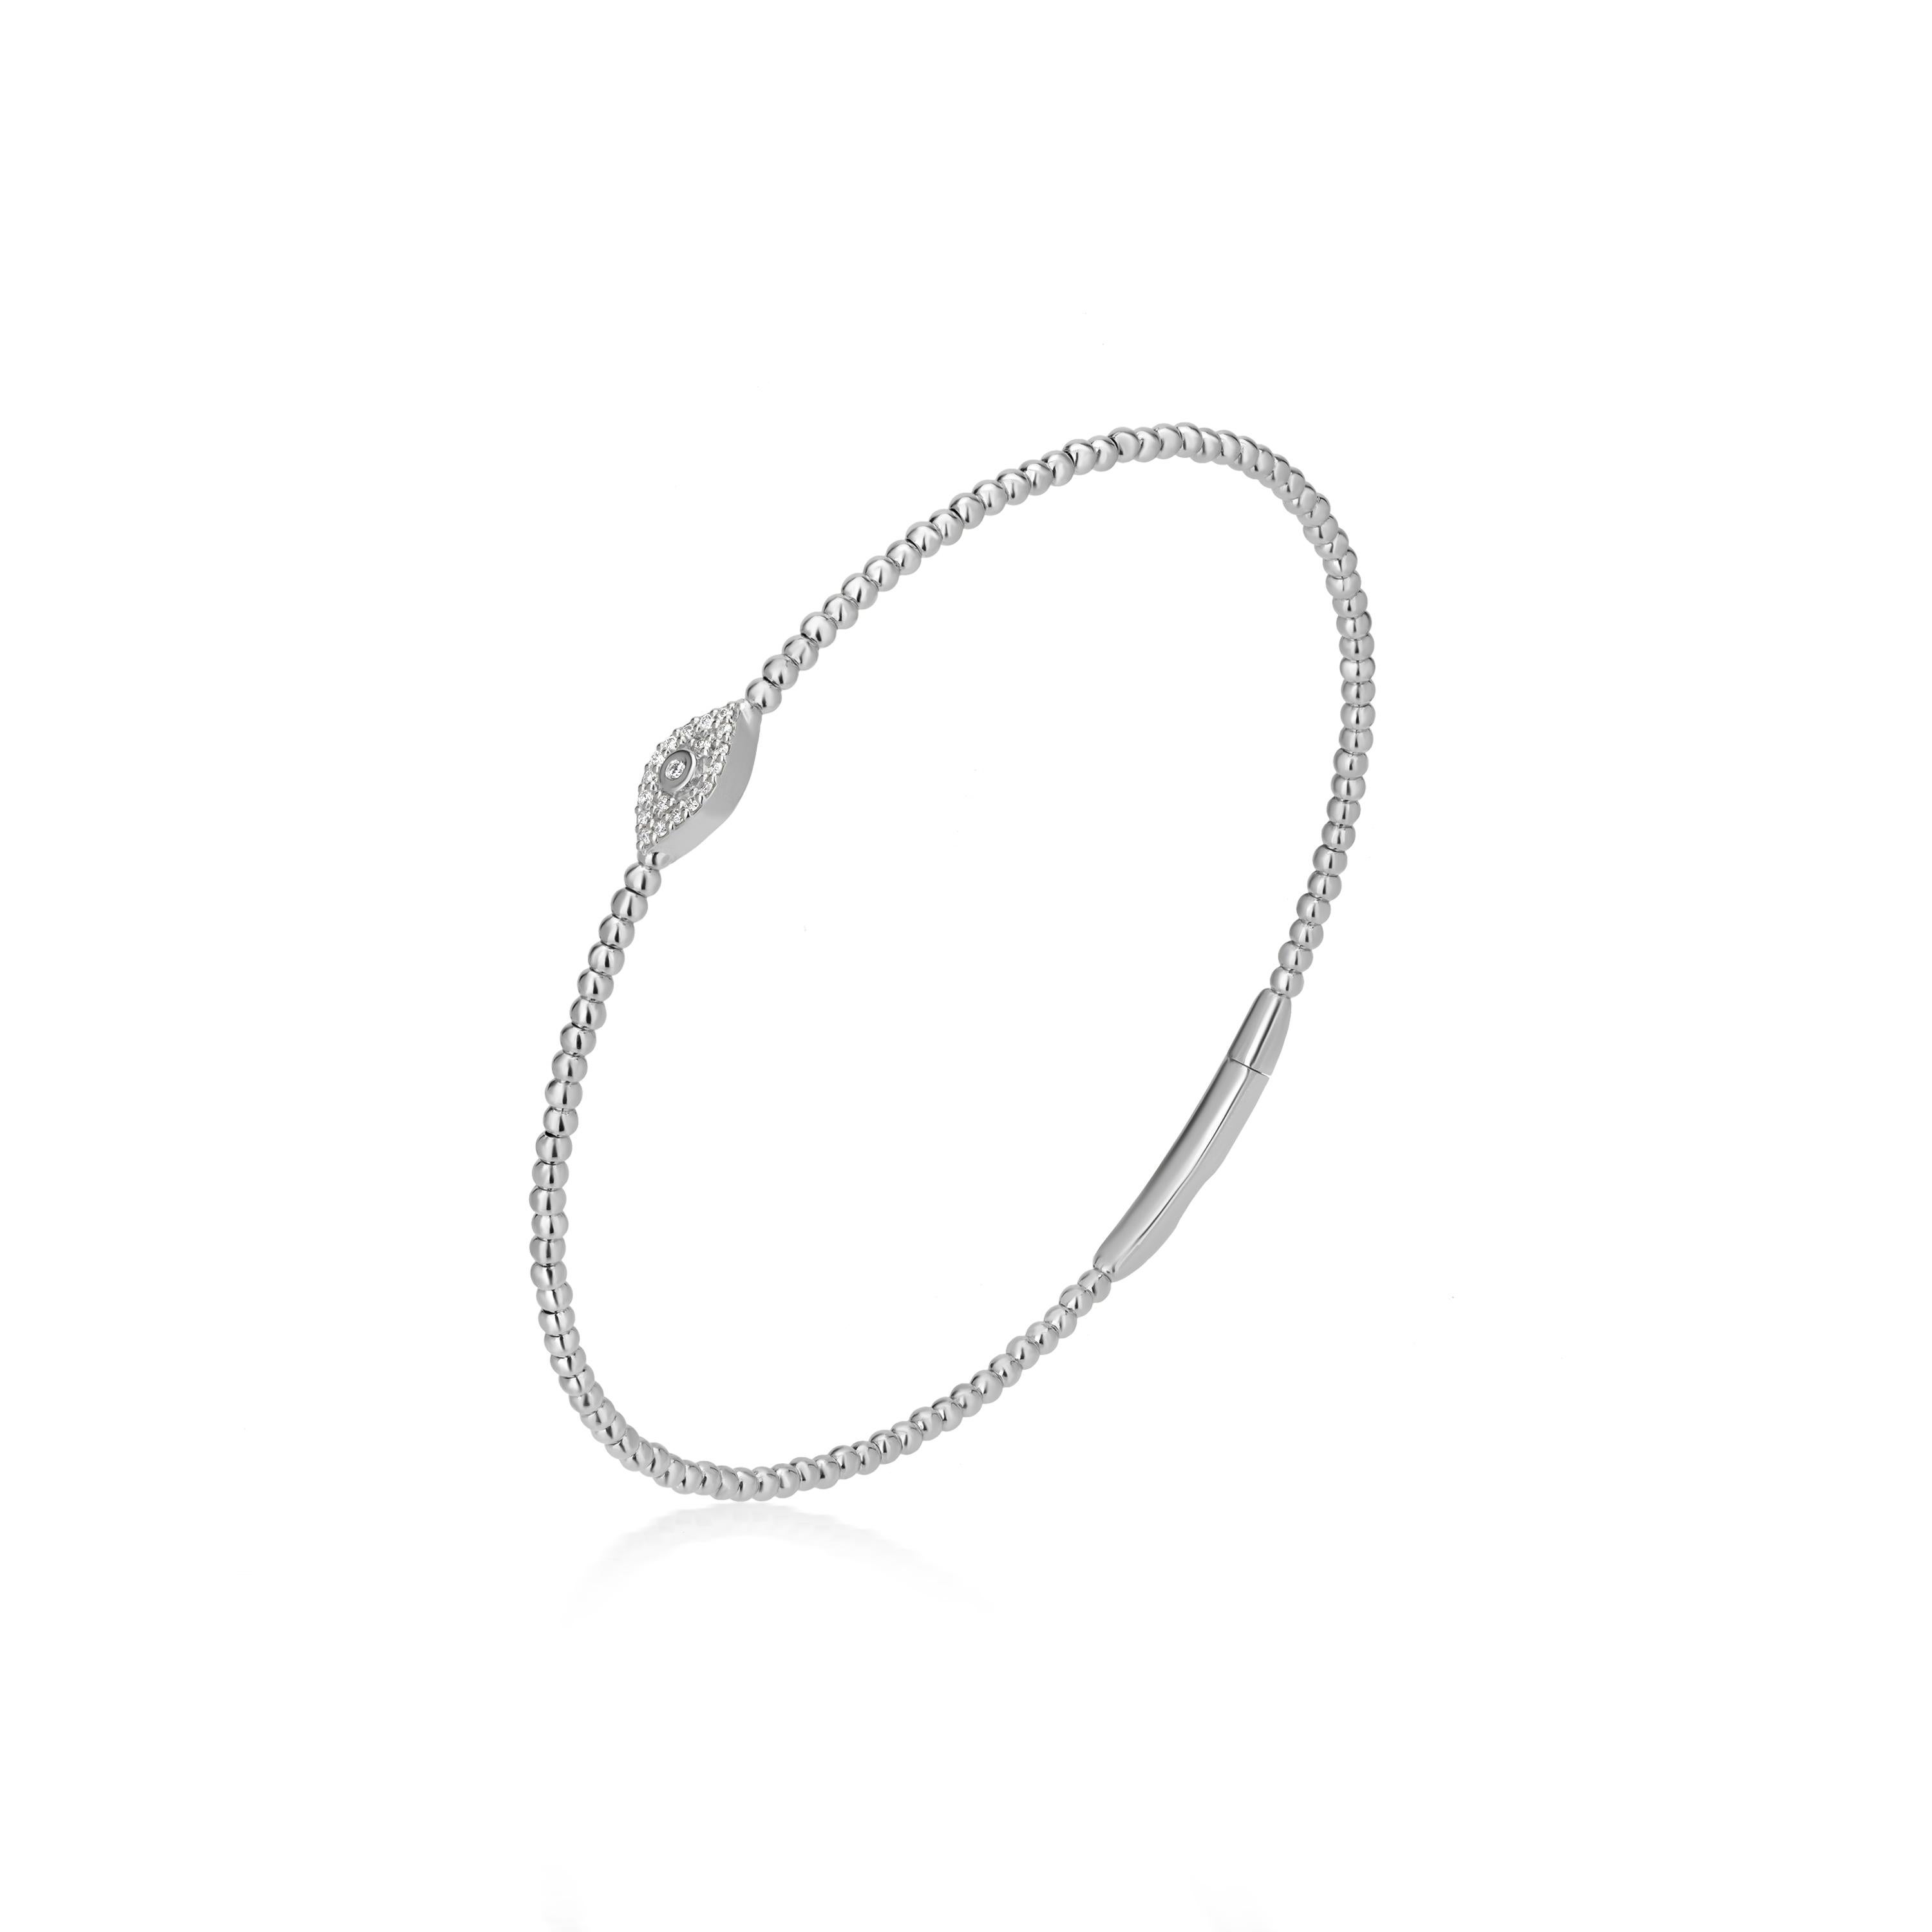 This Luxle bangle bracelet is a stunning piece of jewelry that is sure to turn heads. The centerpiece of the bangle is a cluster of diamonds in the shape of an eye, with each diamond expertly pave set to create a sparkling effect. The band of the